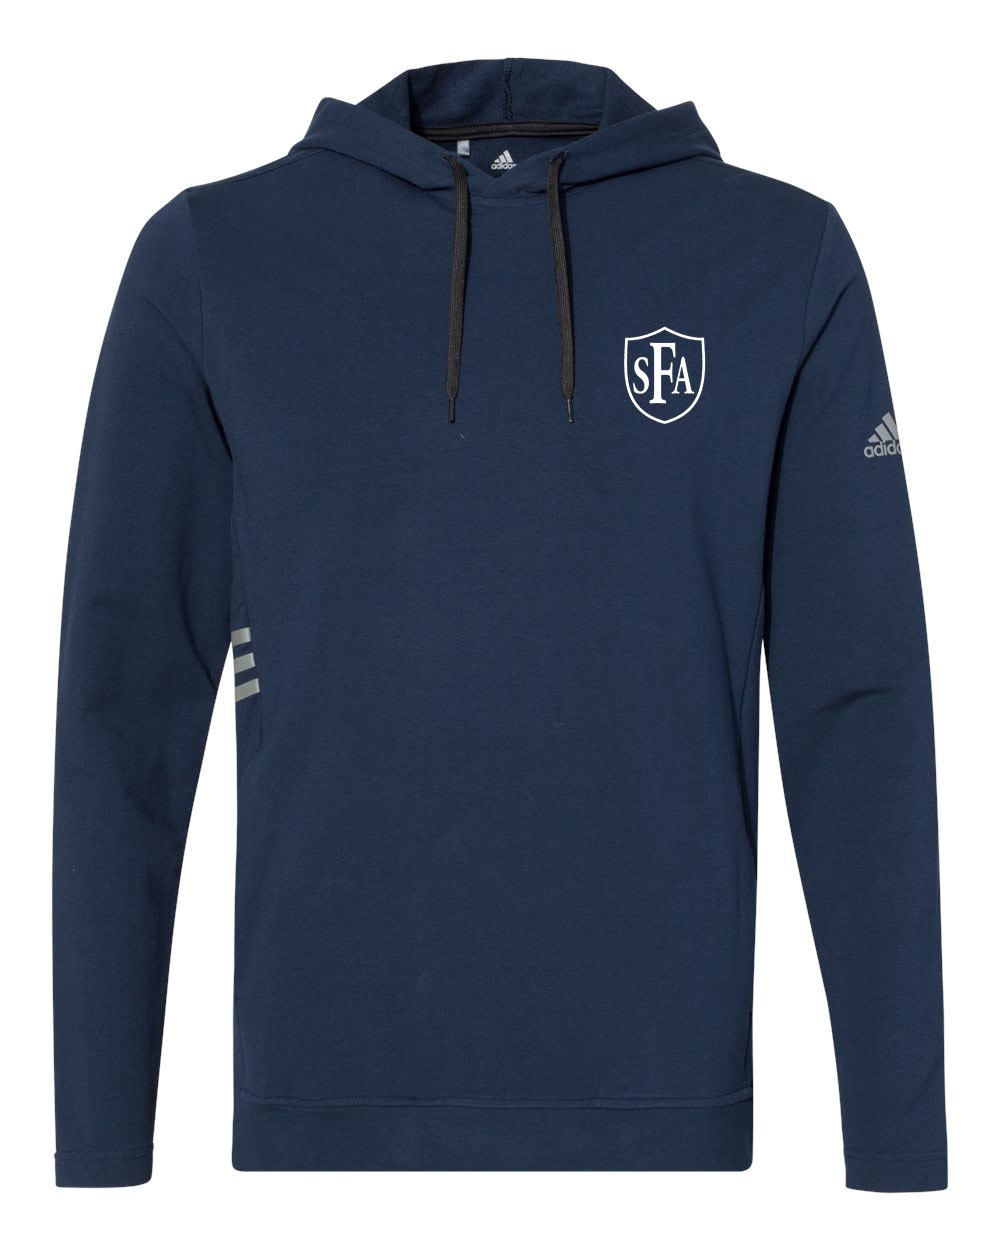 SFA Spirit Adidas Lightweight Hoodie w/Logo - Please Allow 2-3 Weeks For Delivery 